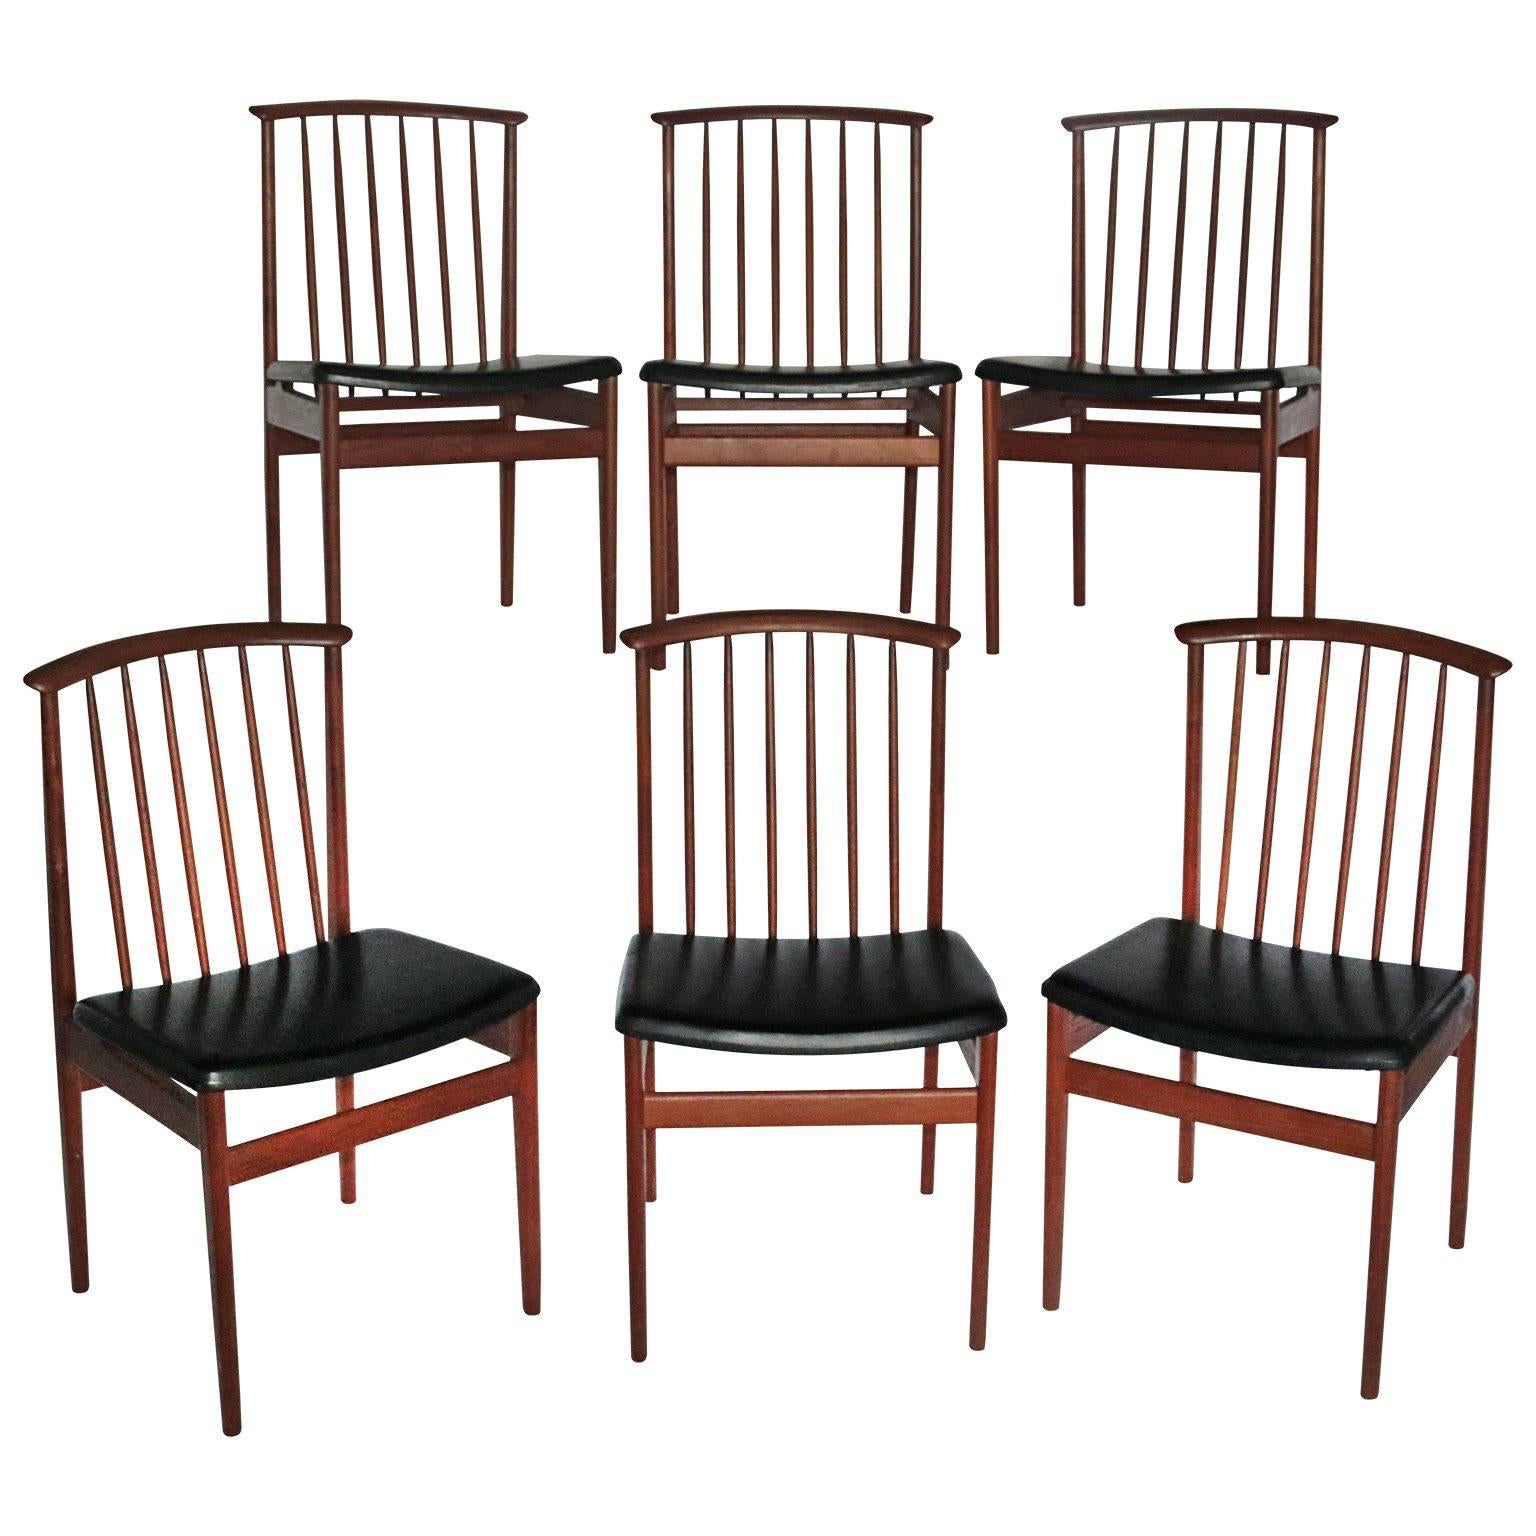 Set of Six Mid-Century Teak Dinning Chairs by DUX